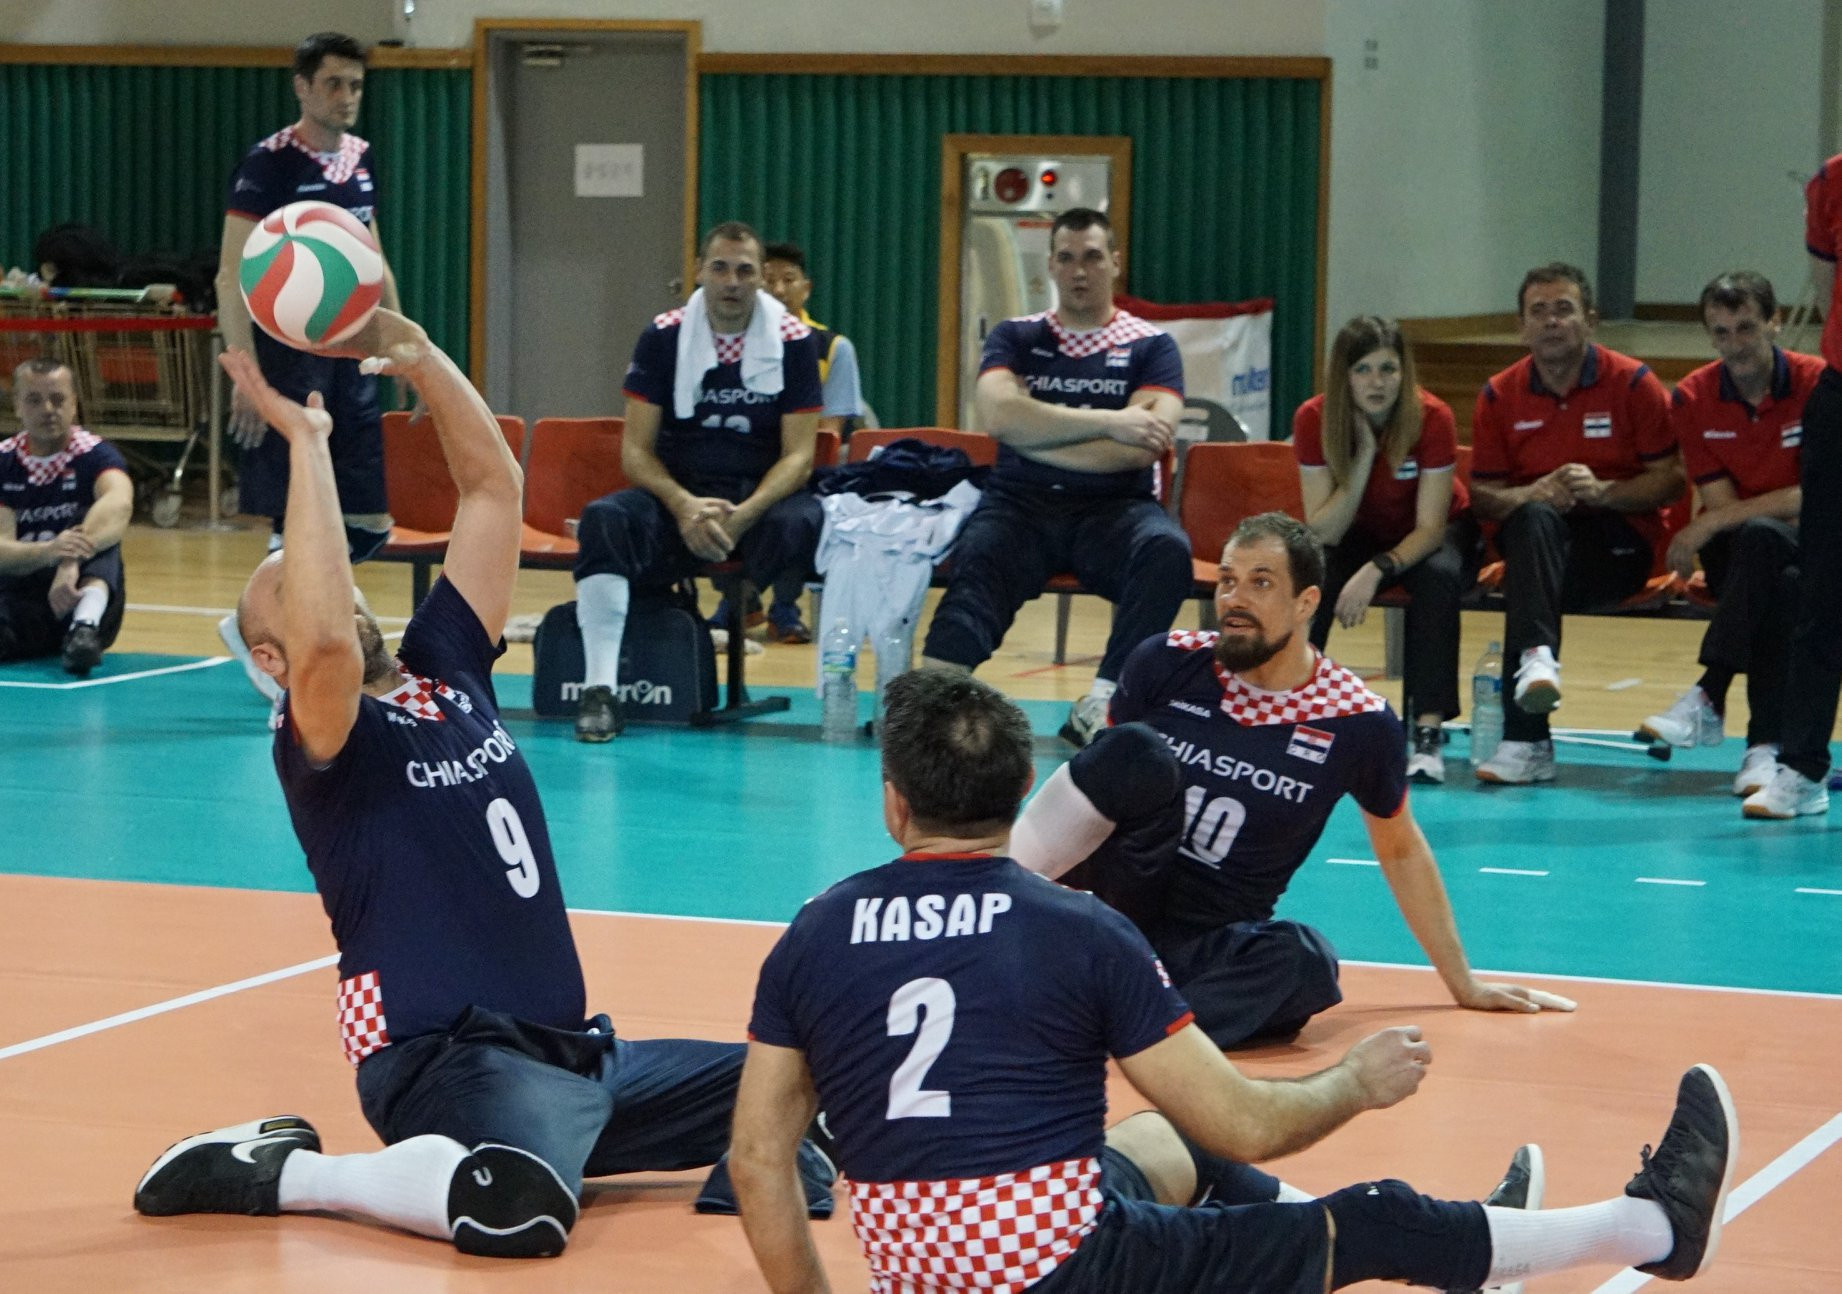 Croatia secured their place at the 2018 Sitting Volleyball World Championships on the final day of the qualifying tournament in Jeju ©World ParaVolley/Facebook